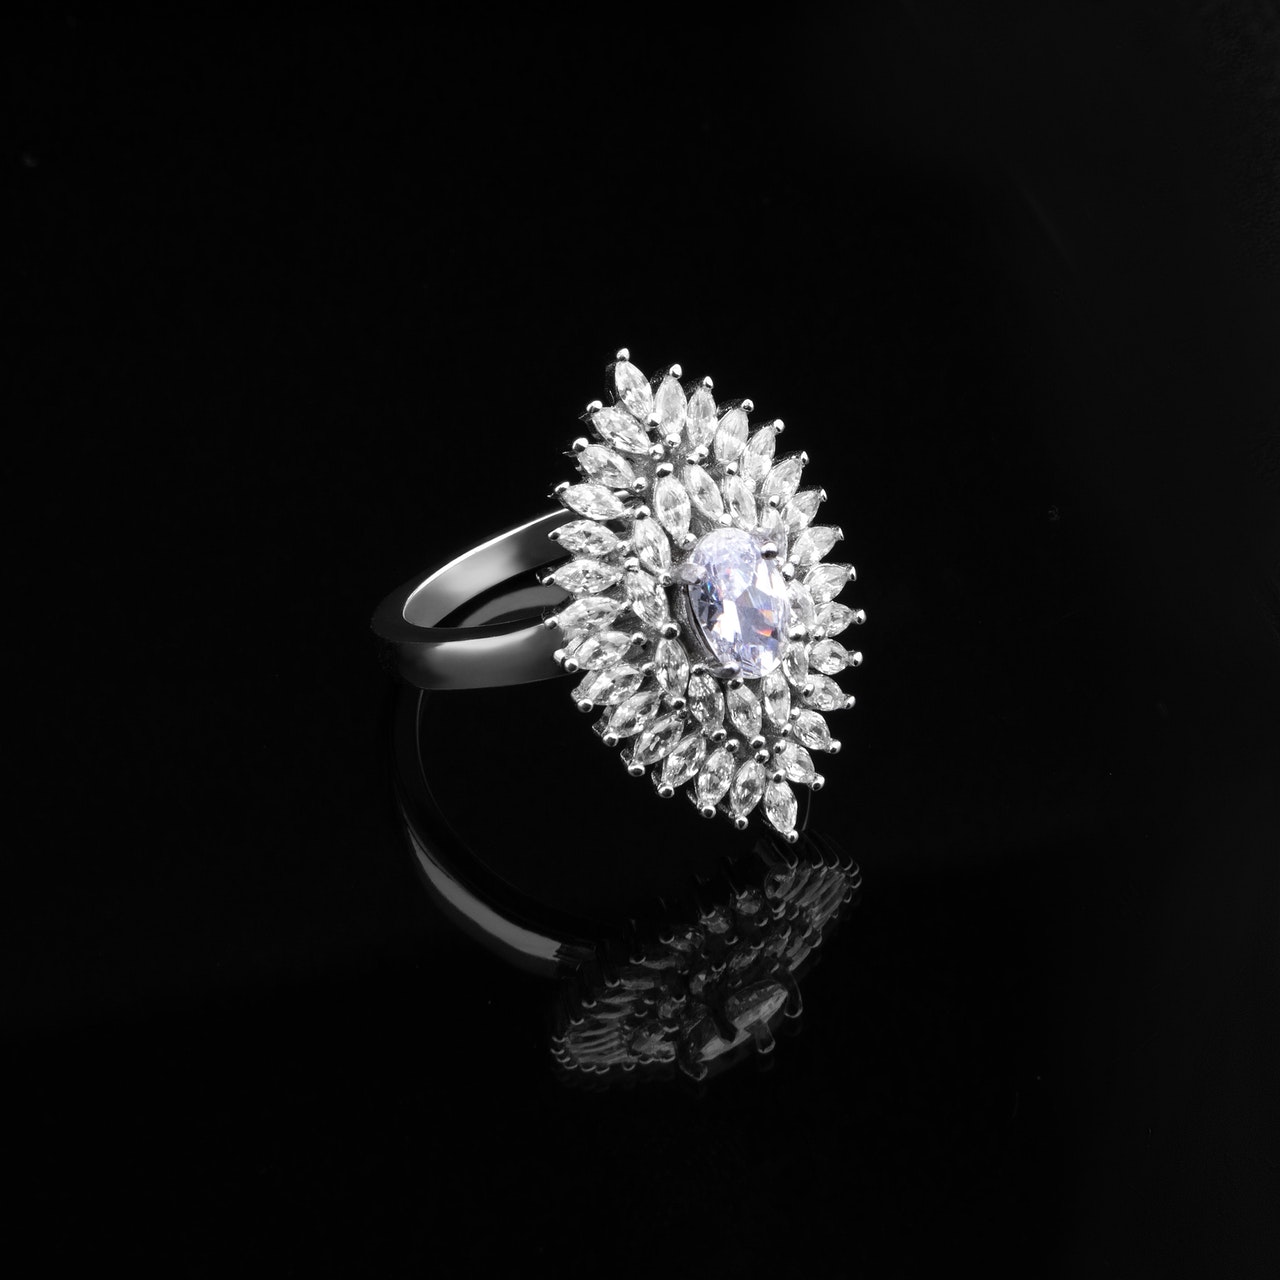 grayscale photography of a ring with diamonds 3266703 - موقع مصري